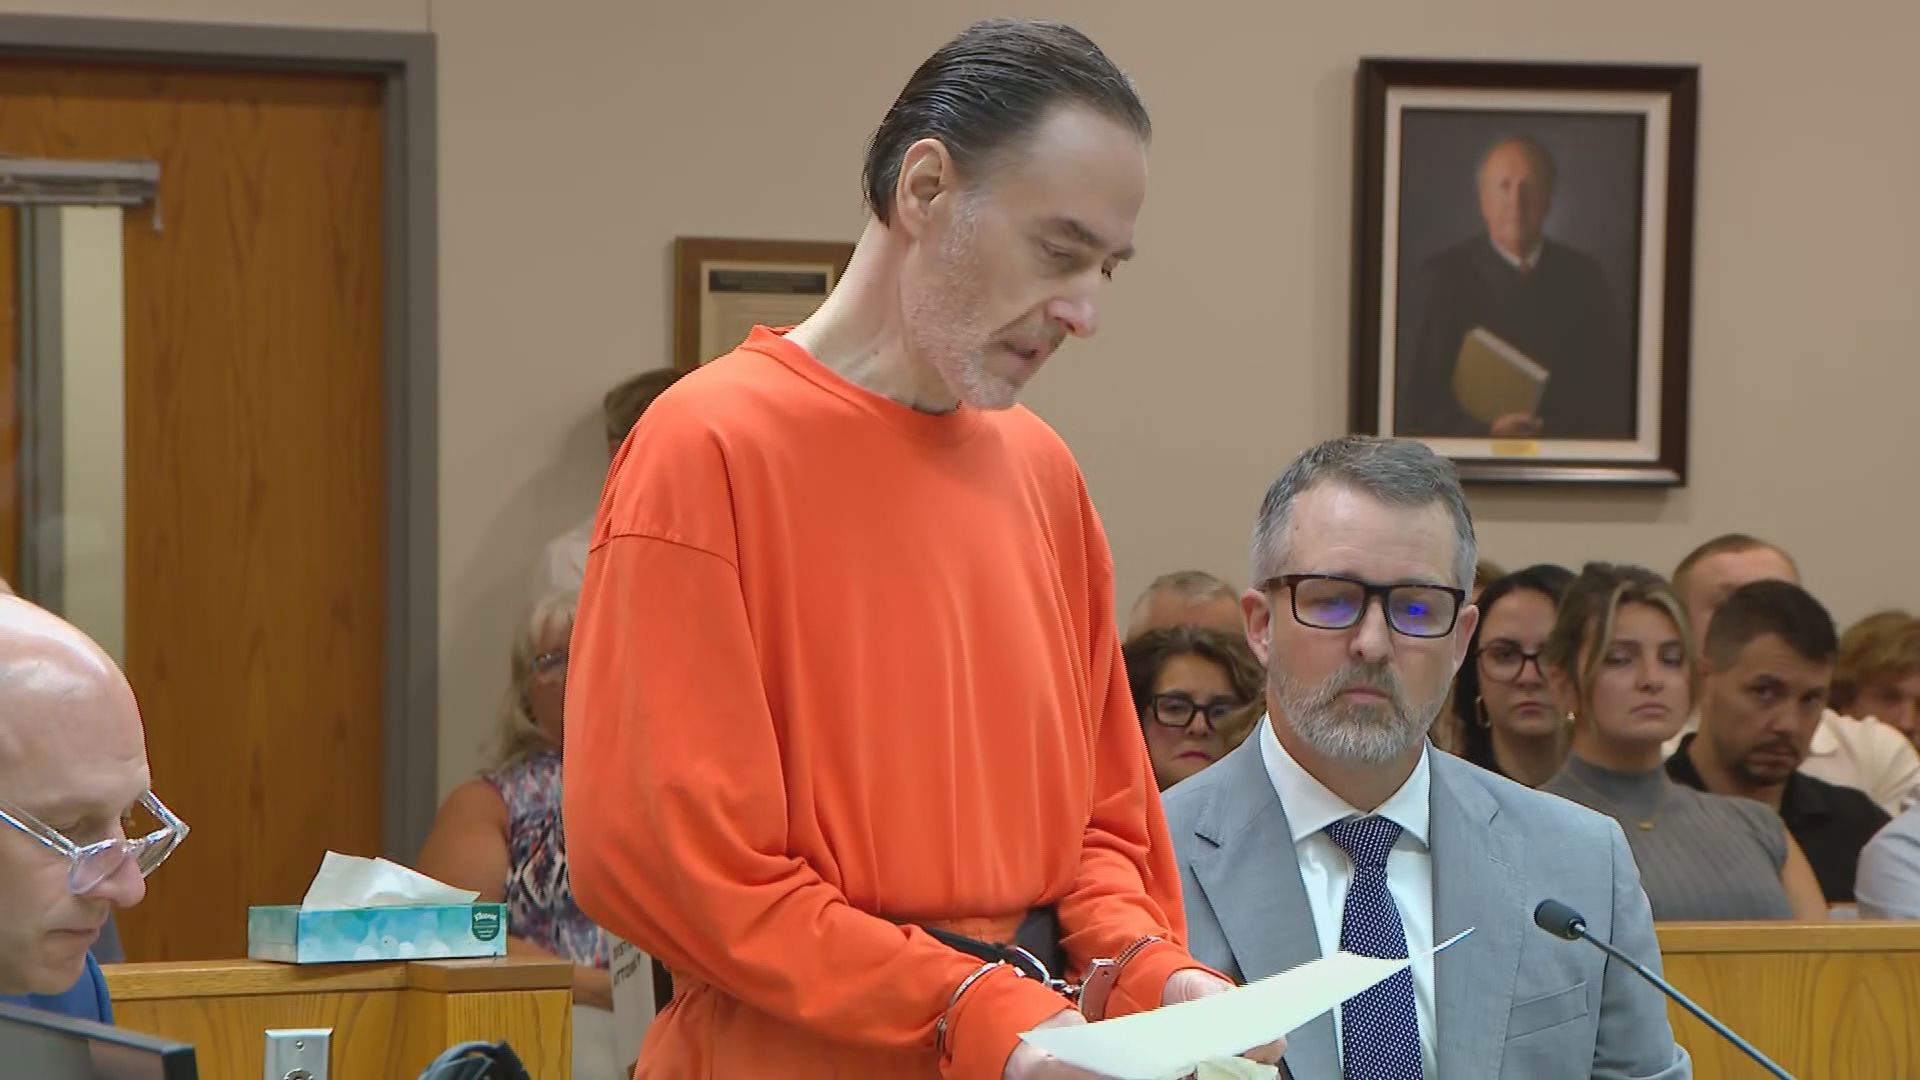 Convicted Apple River killer Nicolae Miu apologizes to the family of his victim, 17-year-old Isaac Schuman, during Wednesday's sentencing hearing.